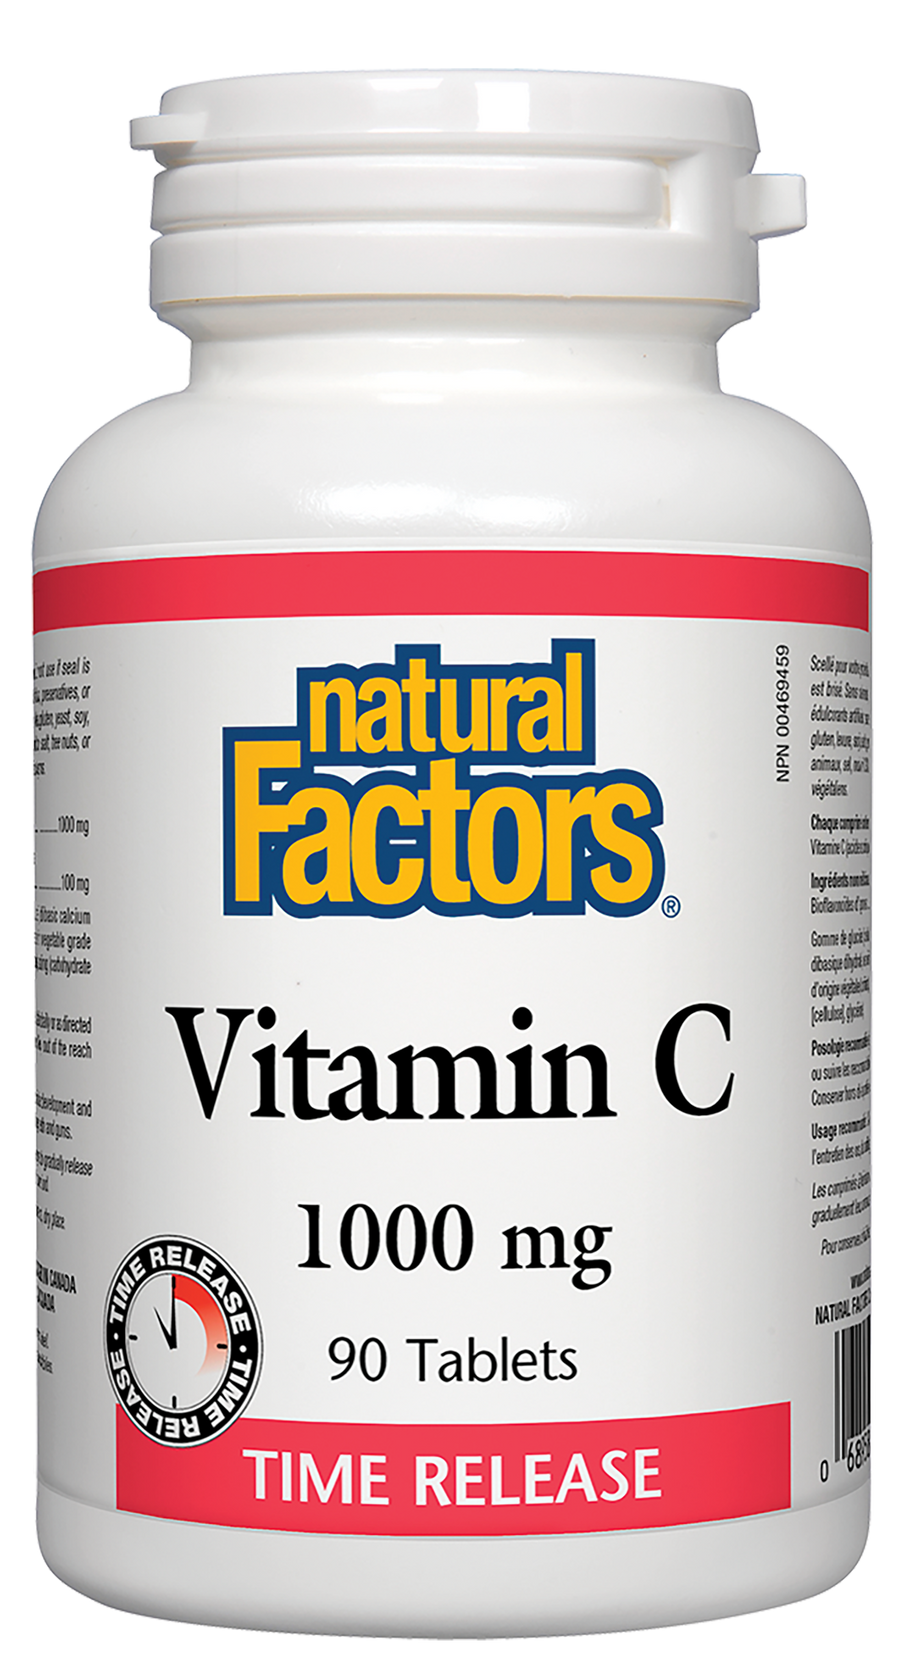 Natural Factors Vitamin C Time Release 1000mg 90 Tablets